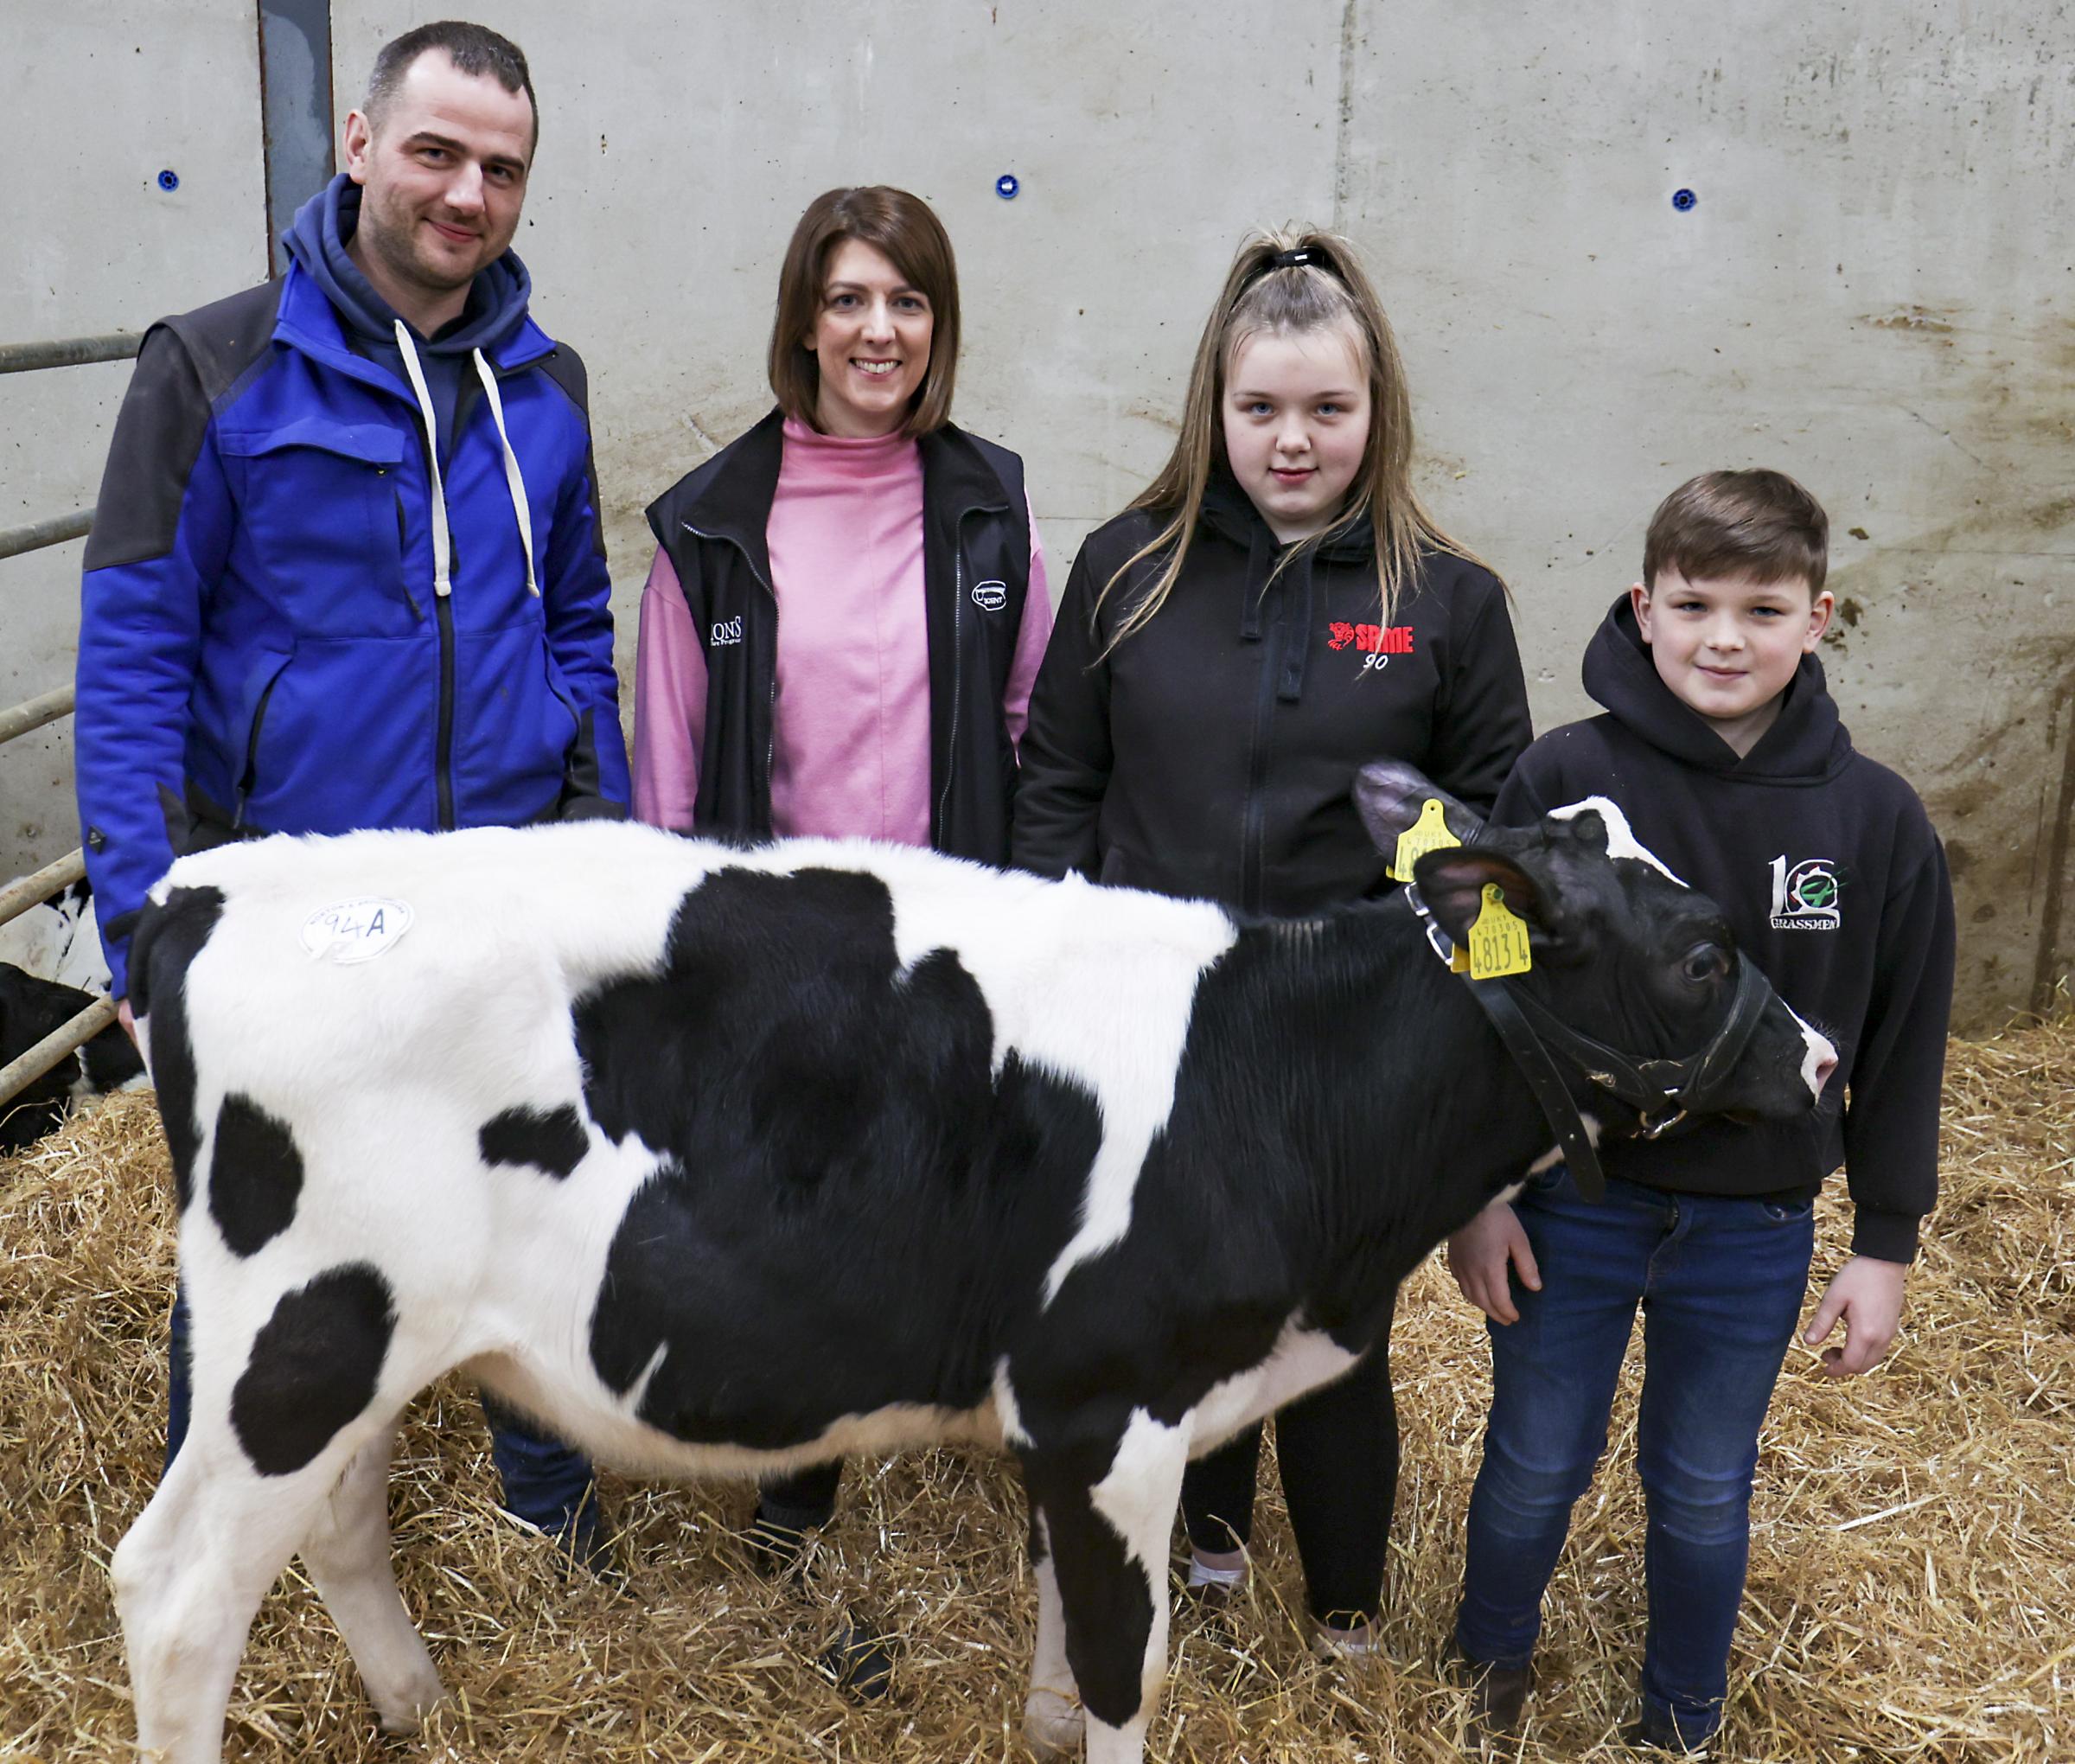 Philip and Joanne Wilson, who auctioned the calf in memory of their late daughter, Faith Isabella Wilson, are pictured with Abbi and Callum McBride, Trillick, who bought the calf.